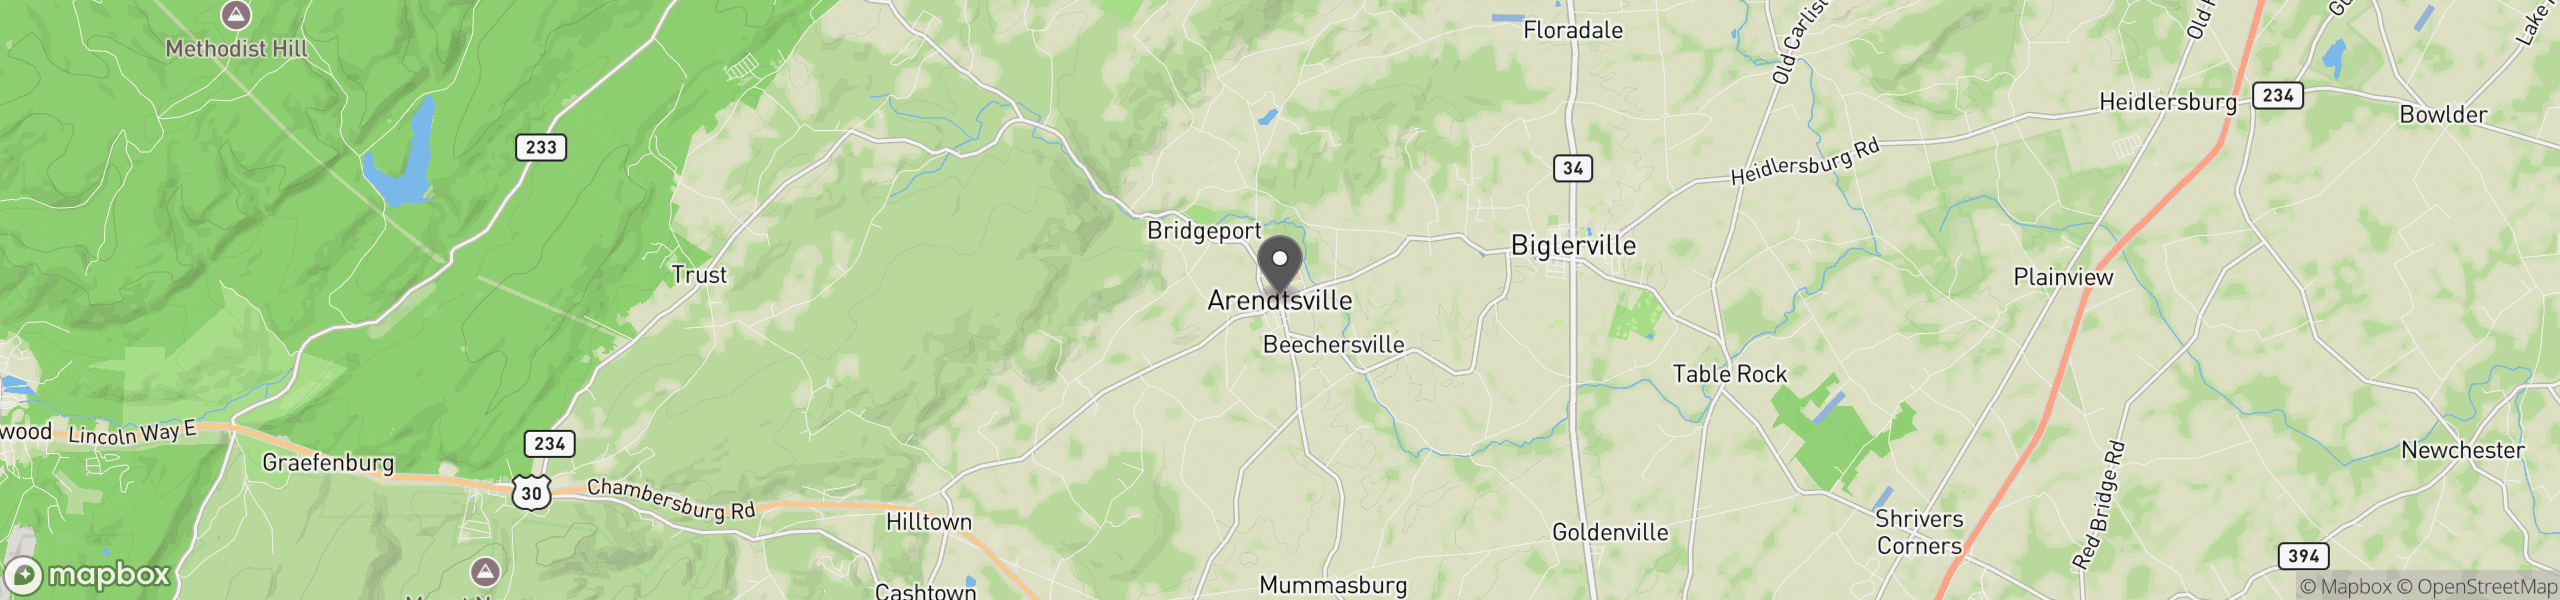 Arendtsville, PA